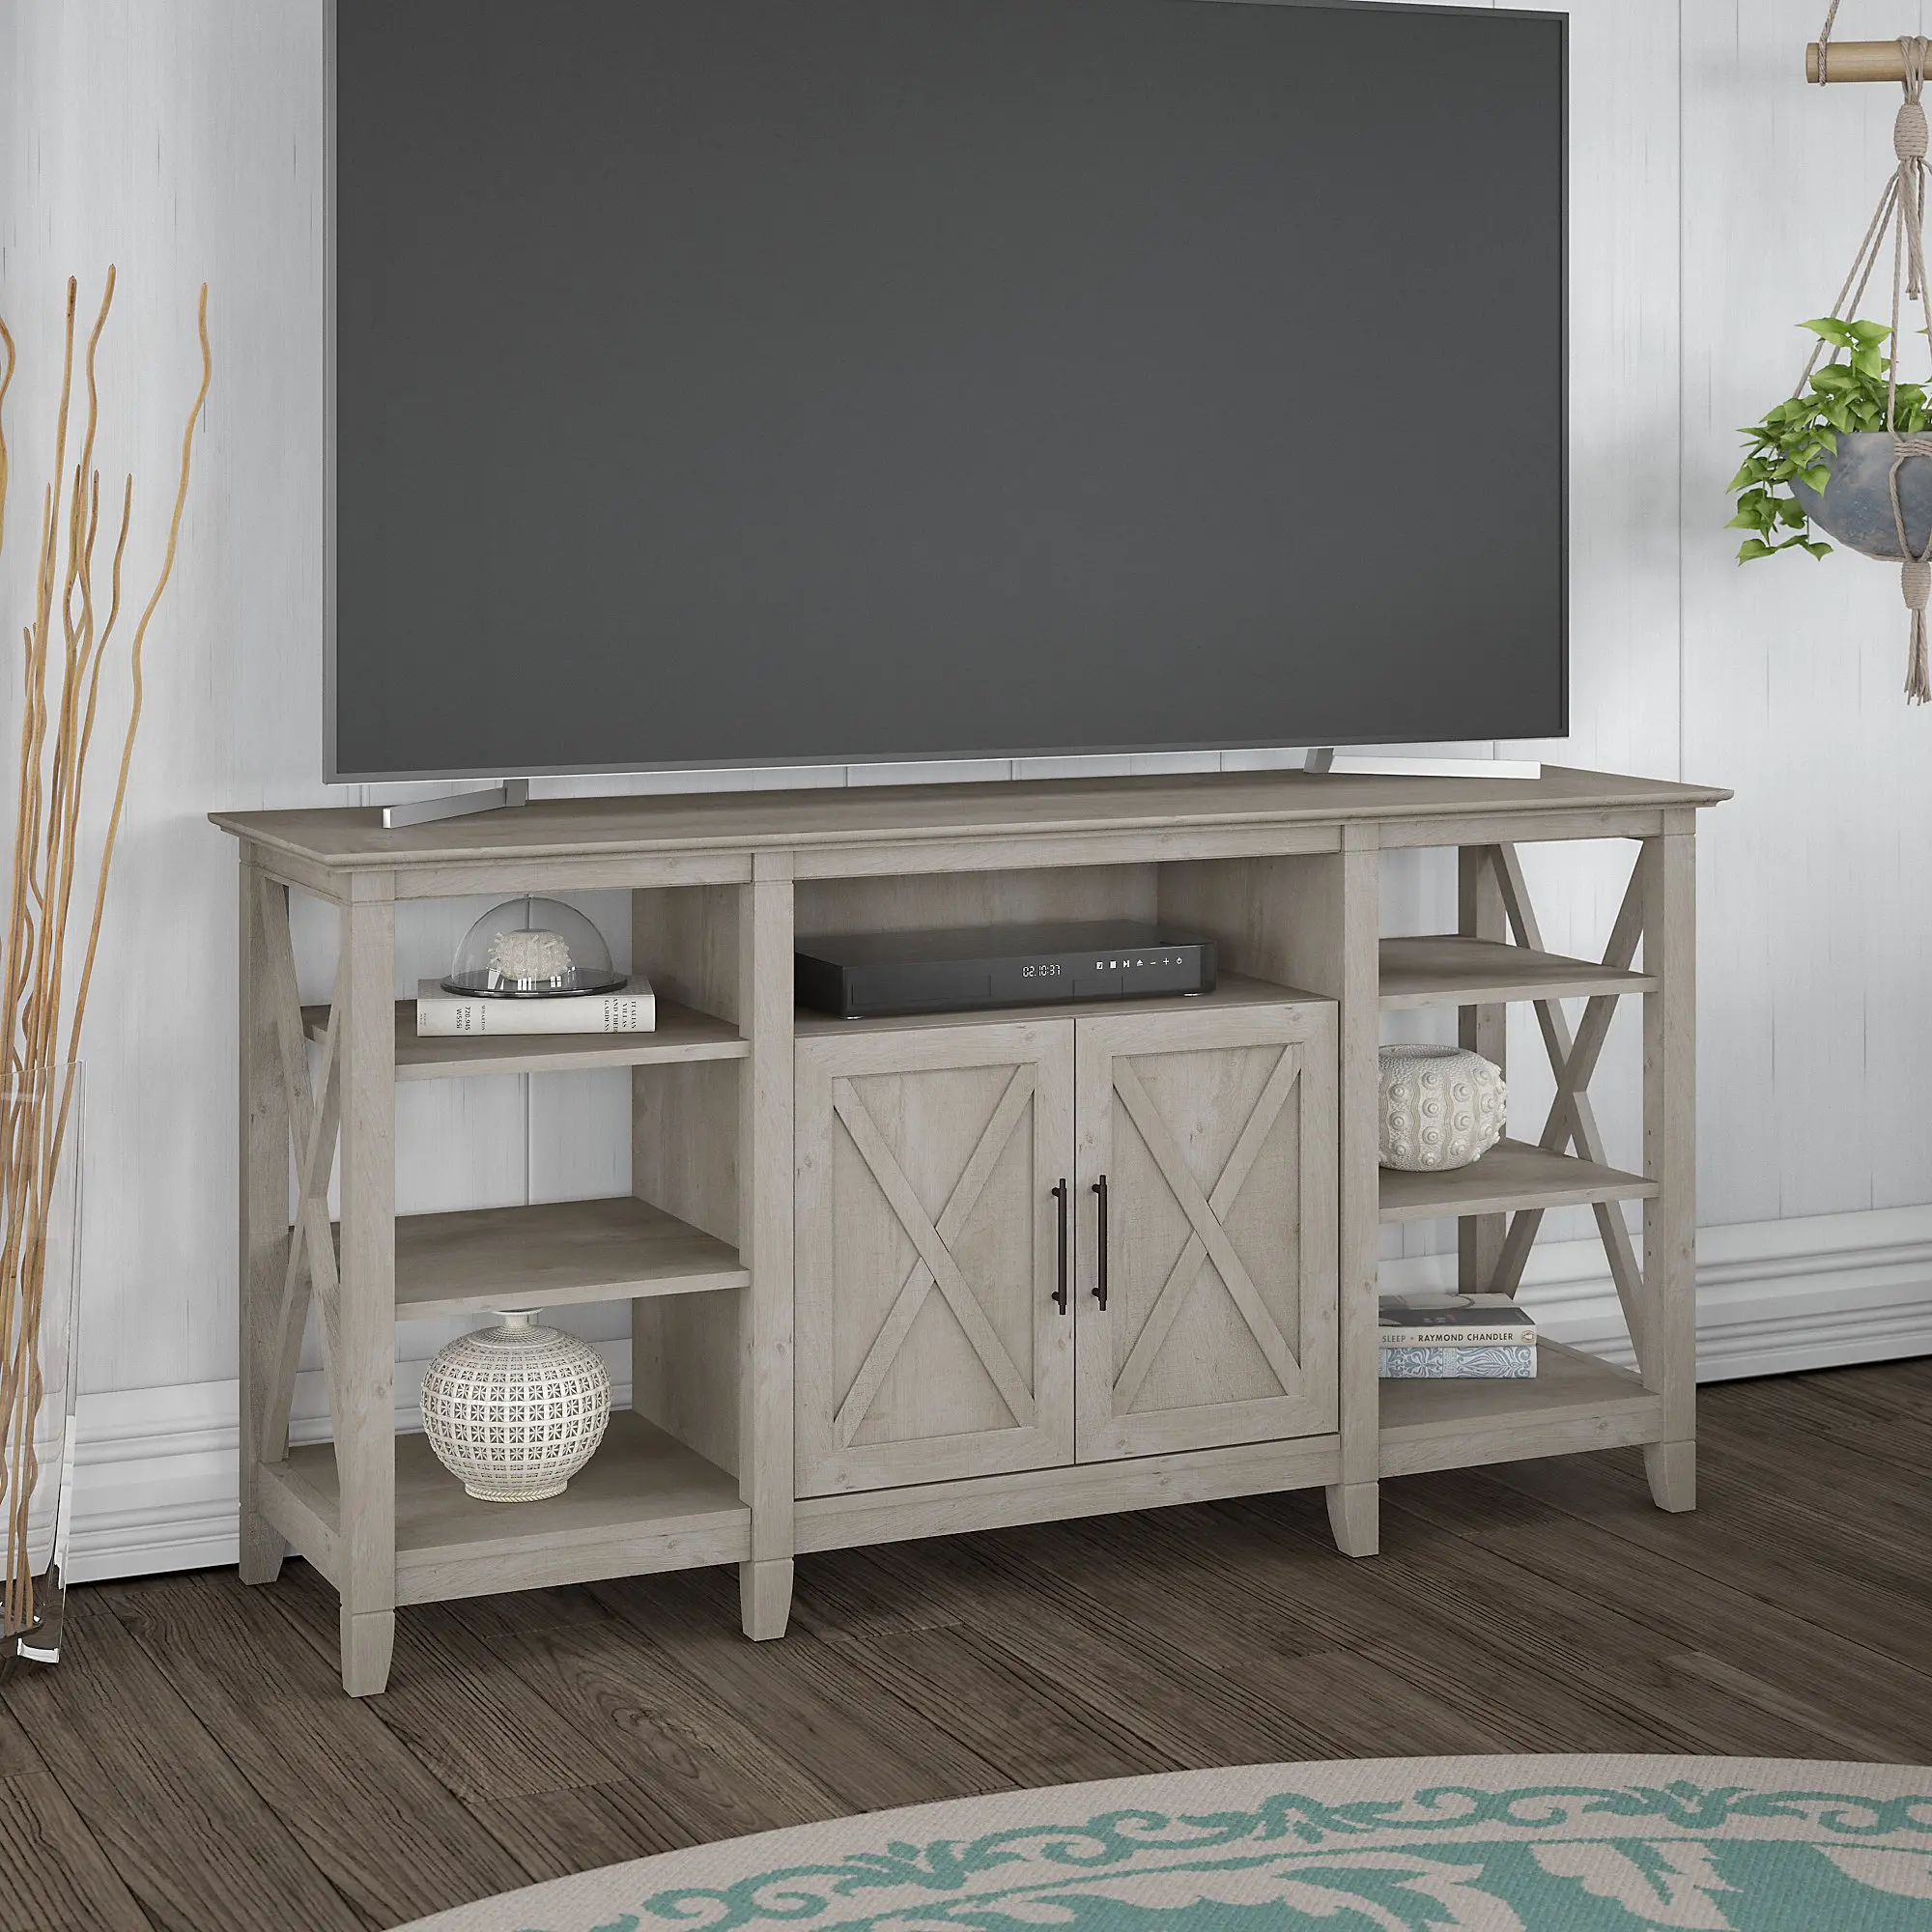 https://static.rcwilley.com/products/111925400/Key-West-Washed-Gray-60-TV-Stand---Bush-Furniture-rcwilley-image1.webp